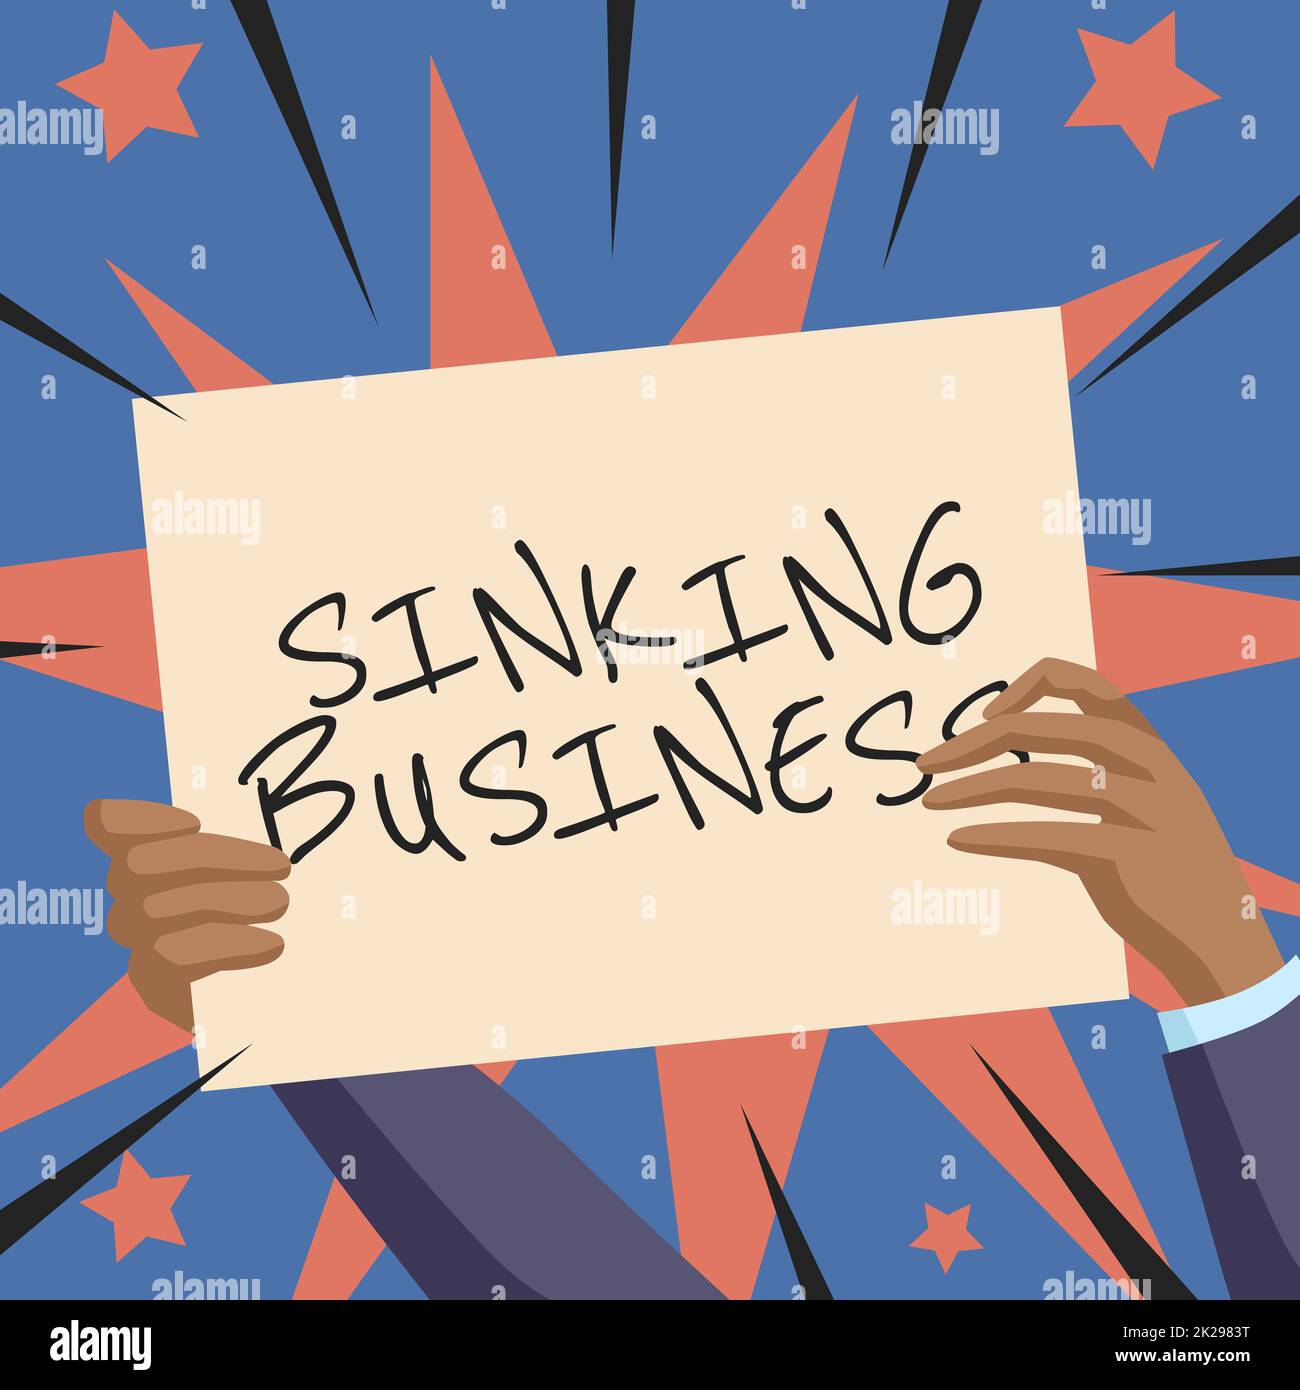 Text caption presenting Sinking Business. Business idea the company or other organization that is failing Hands Holding Paper Showing New Ideas Surrounded With Stars. Stock Photo